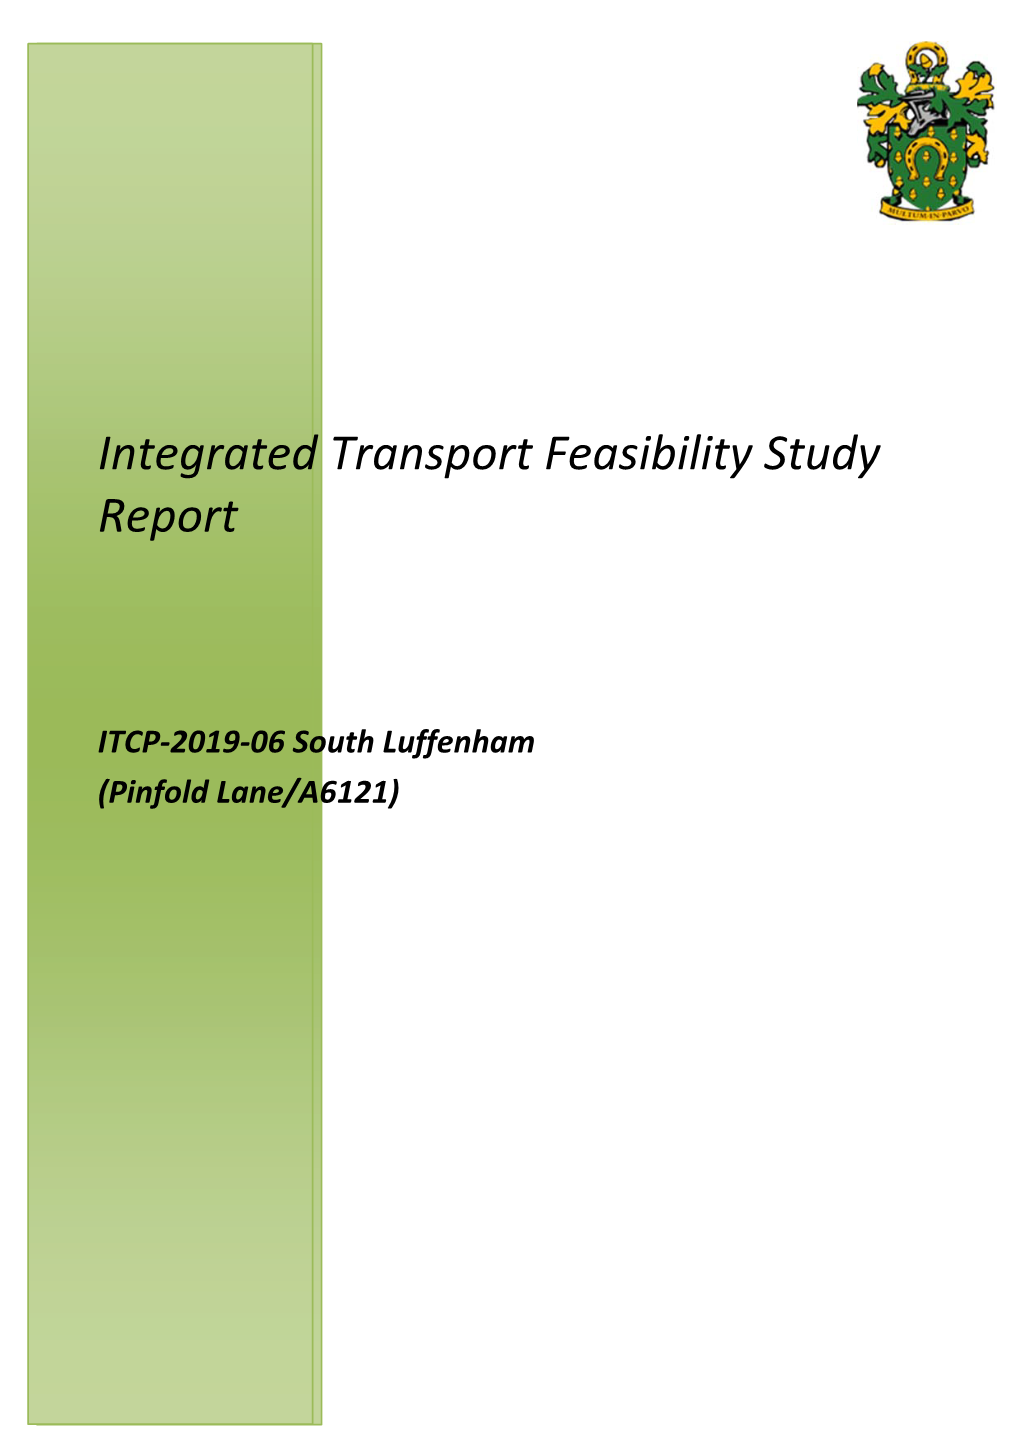 Integrated Transport Feasibility Study Report